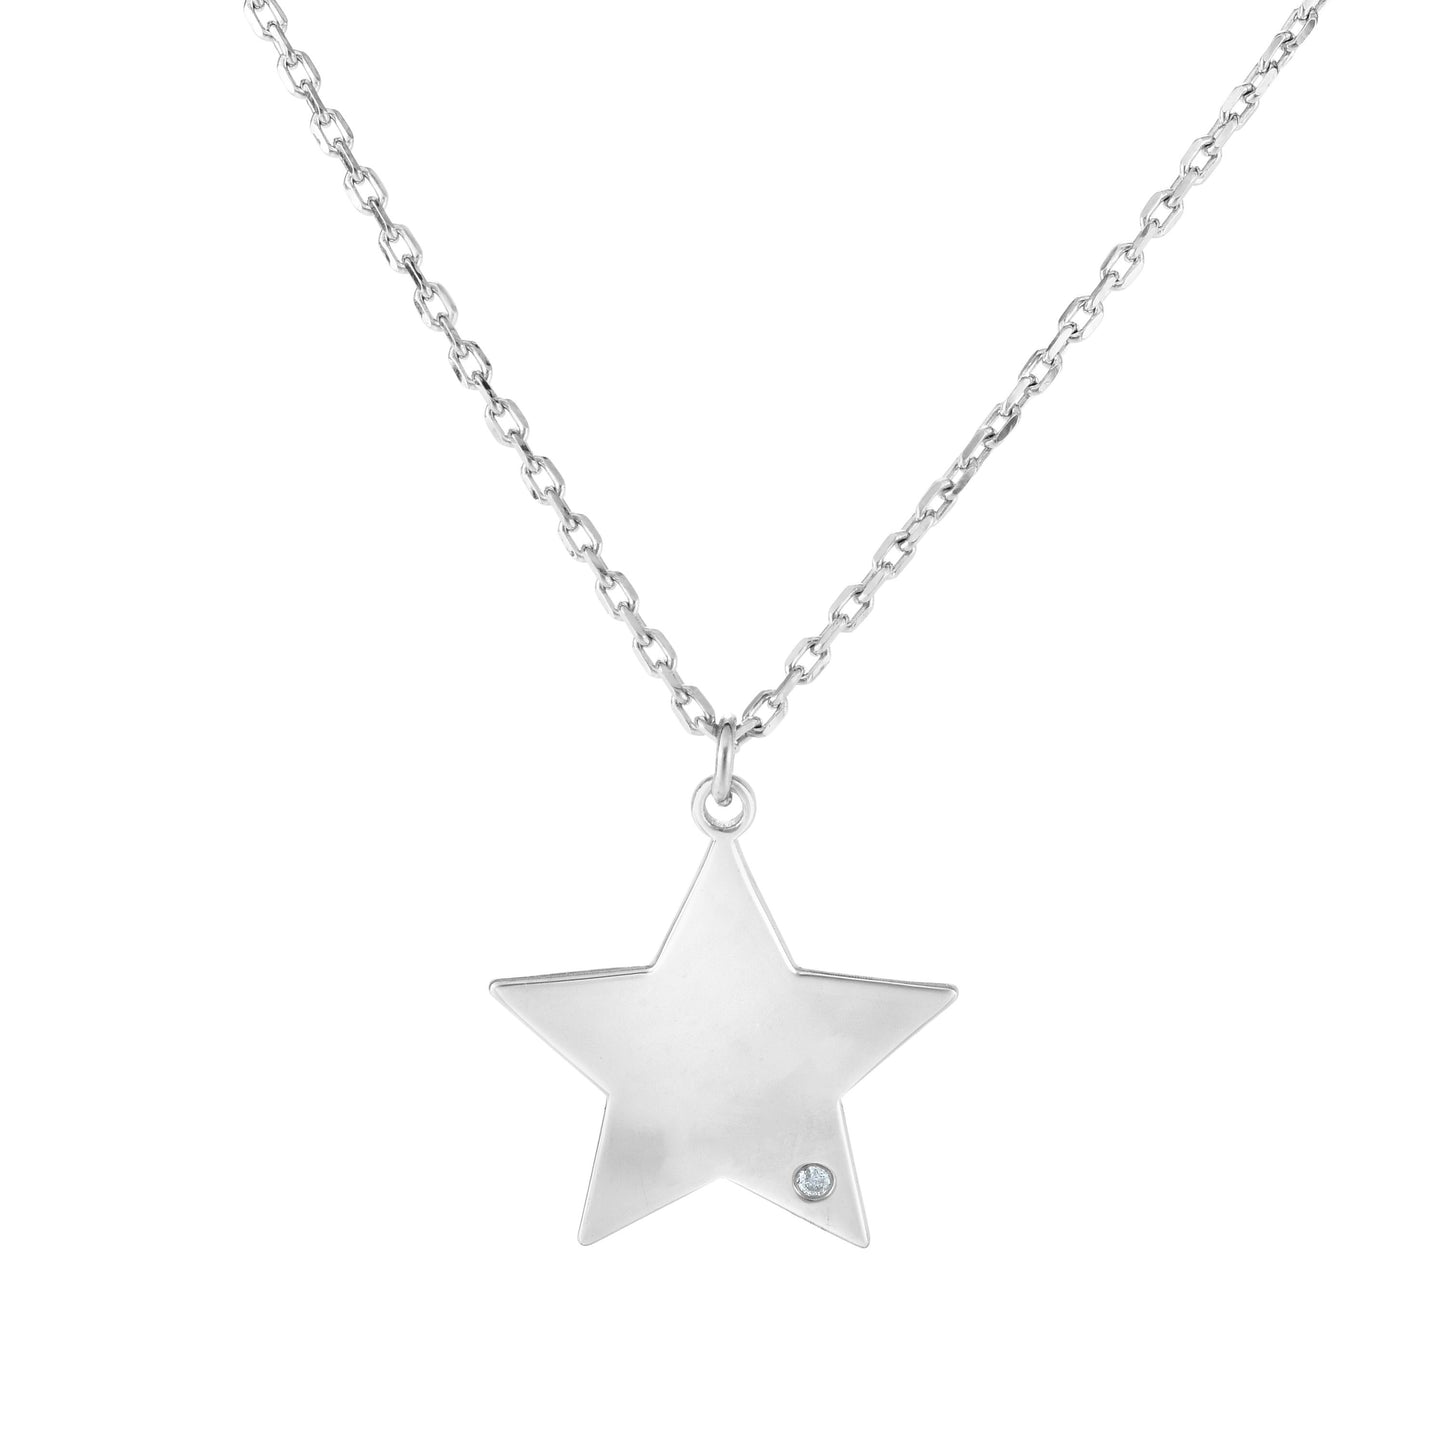 Silver Polished Star Diamond Accent Necklace